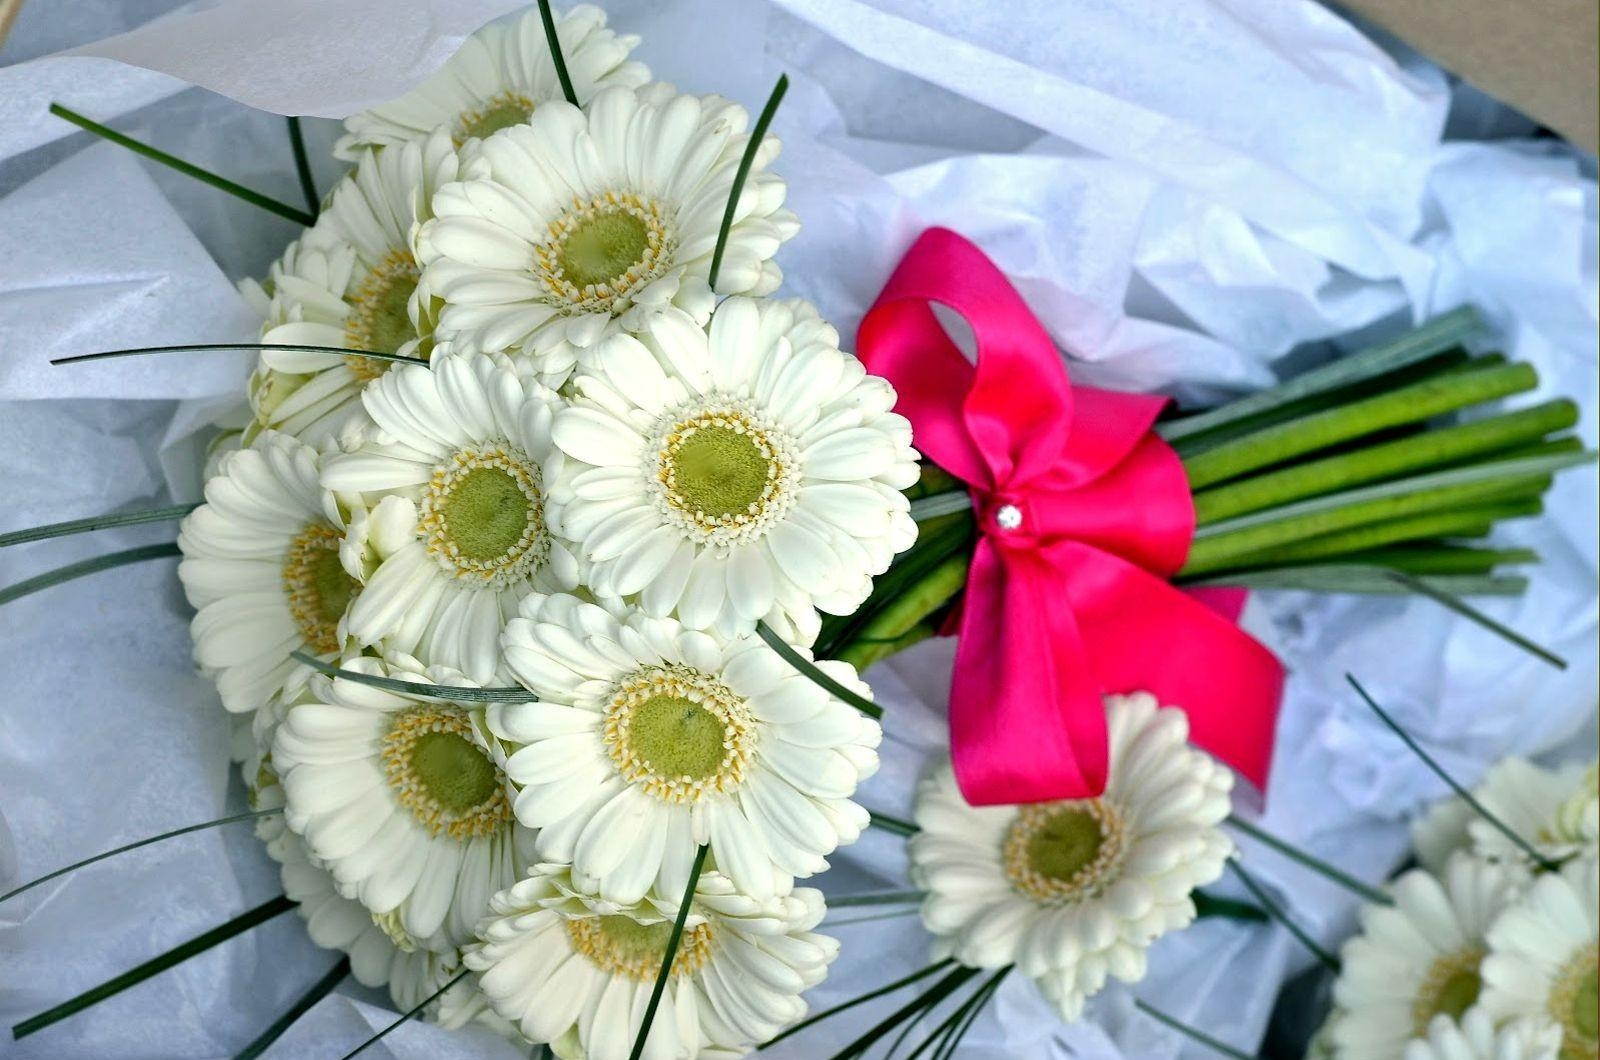 flowers, gerberas, white, bouquet, bow, handsomely, it's beautiful, snow white cellphone